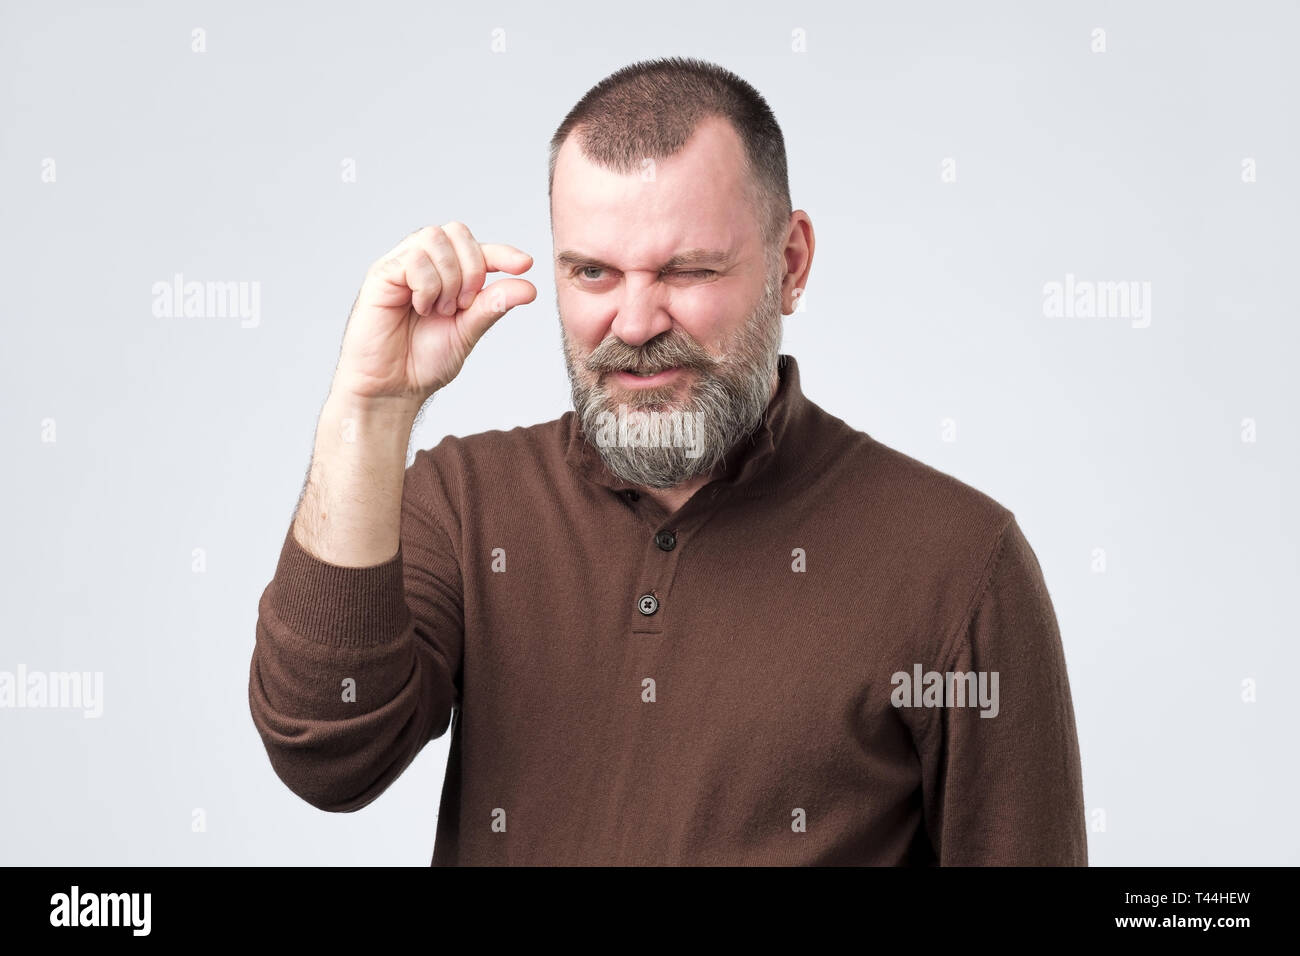 Mature caucasian man gesturing with hand showing small size Stock Photo